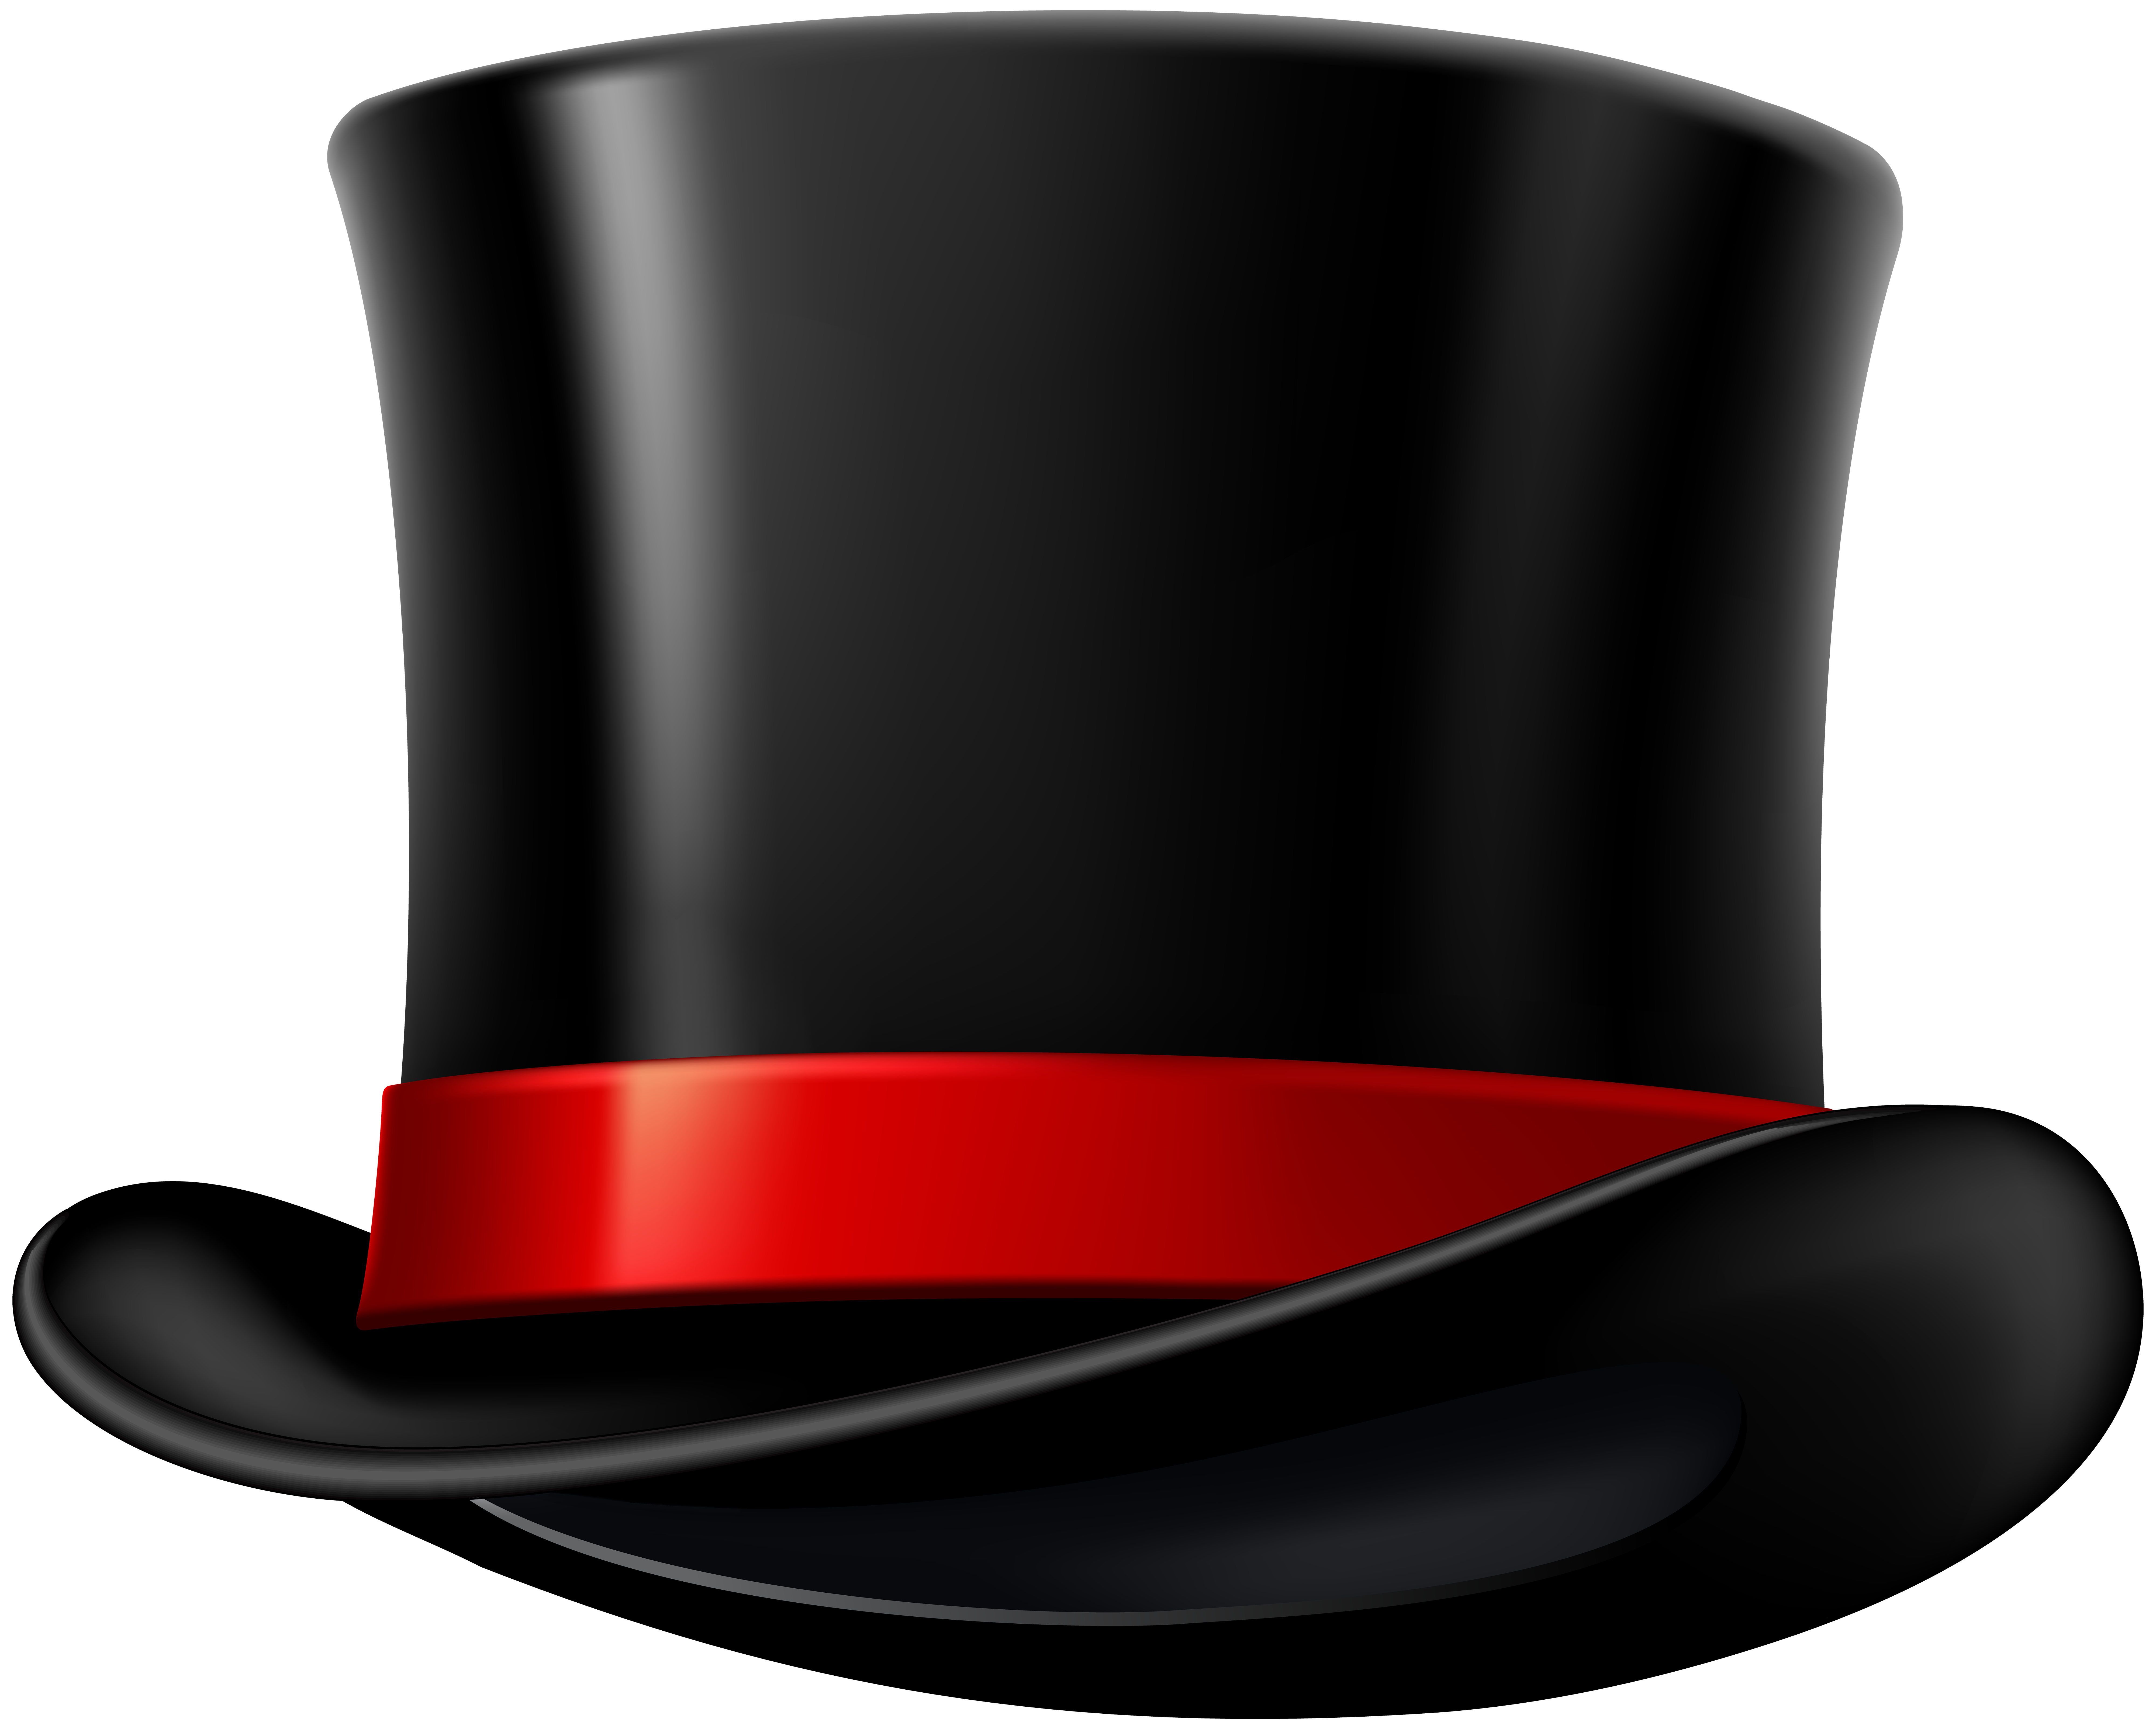 Top Hat Transparent Image Gallery Yopriceville High Quality Images And Transparent Png Free Clipart